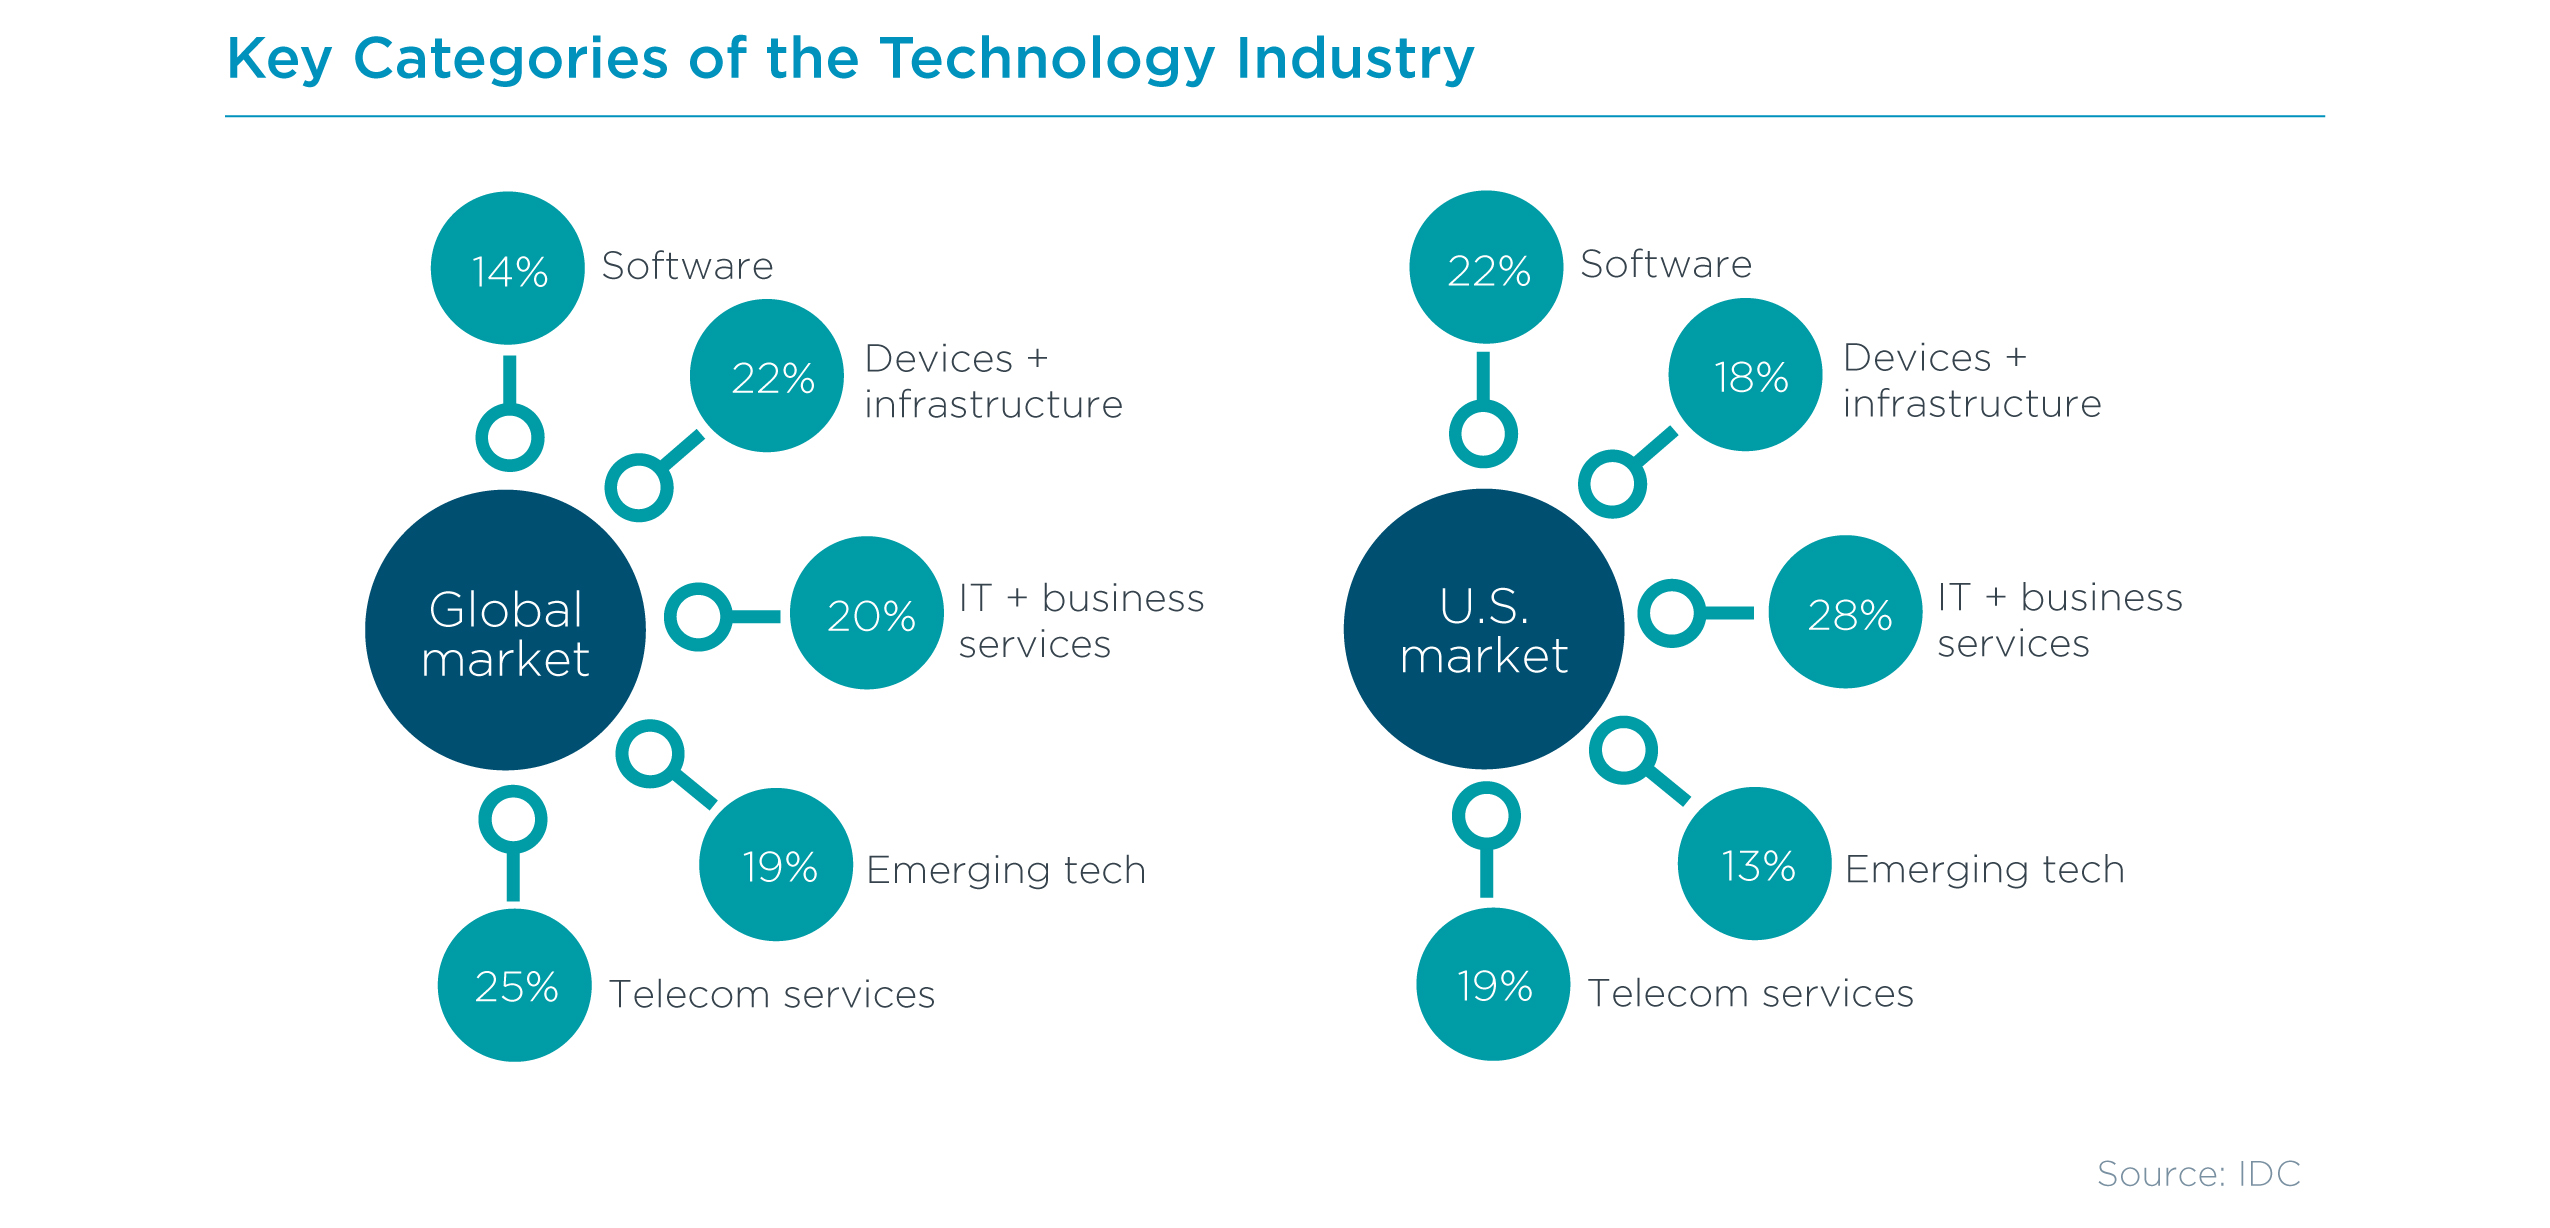 Key Categories of the Technology Industry